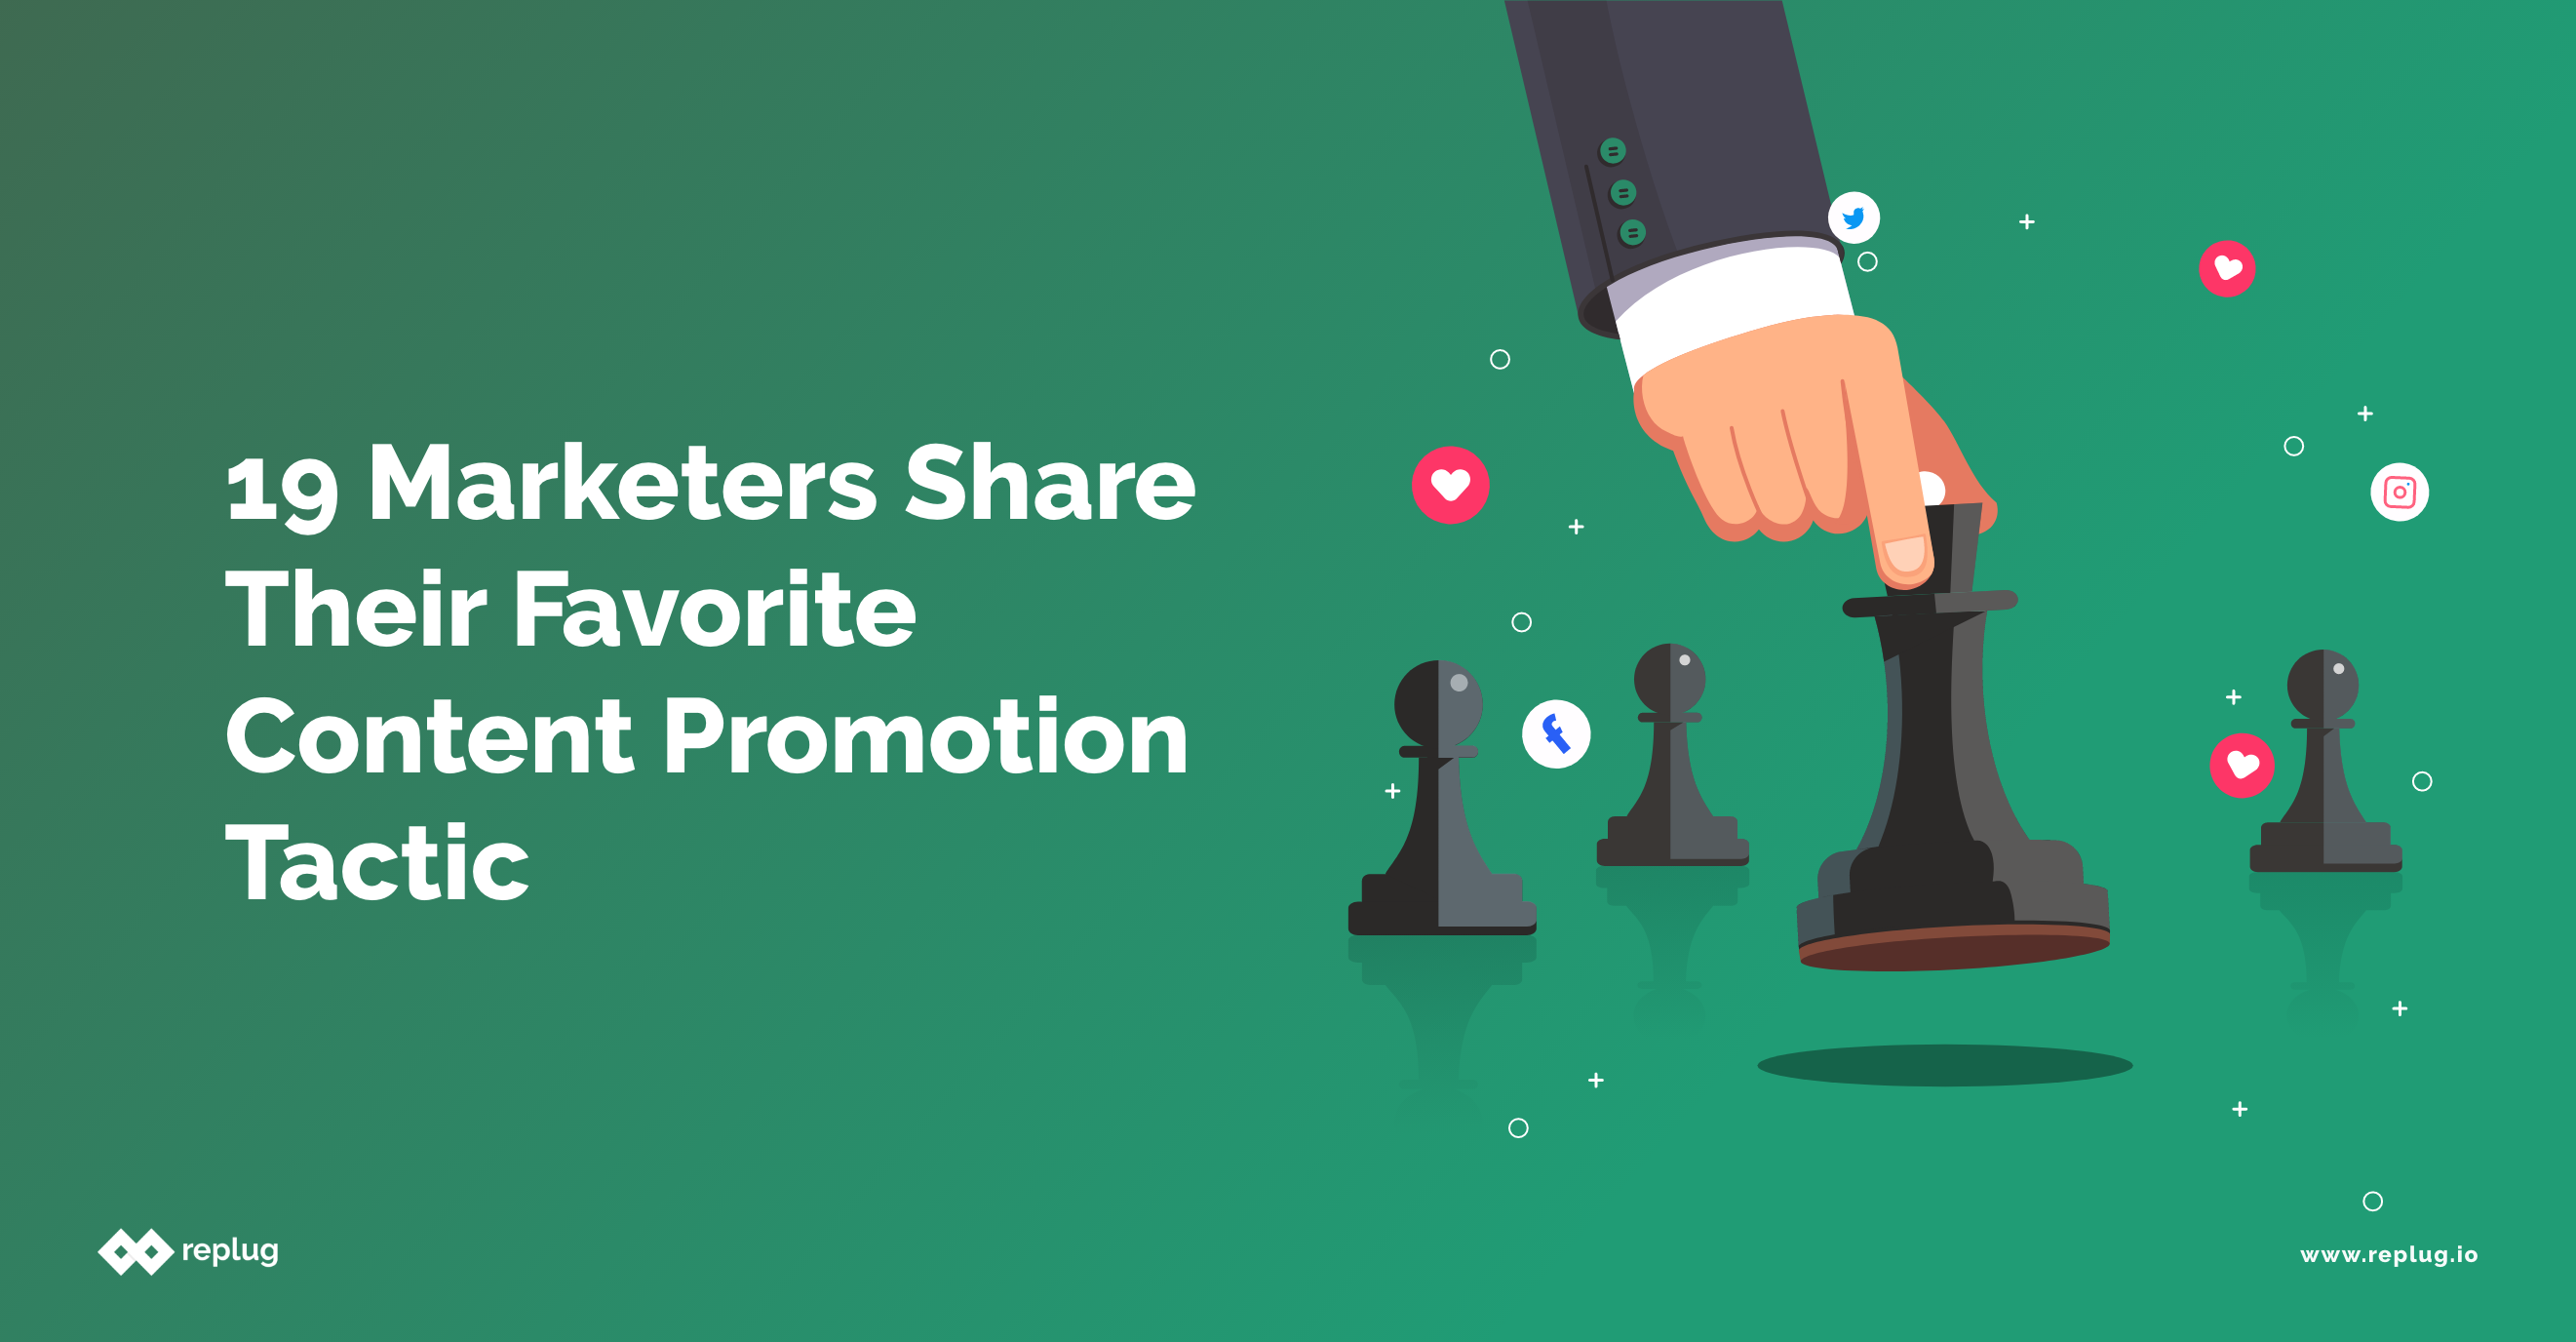 19 Marketers share their Favorite Content Promotion Tactic